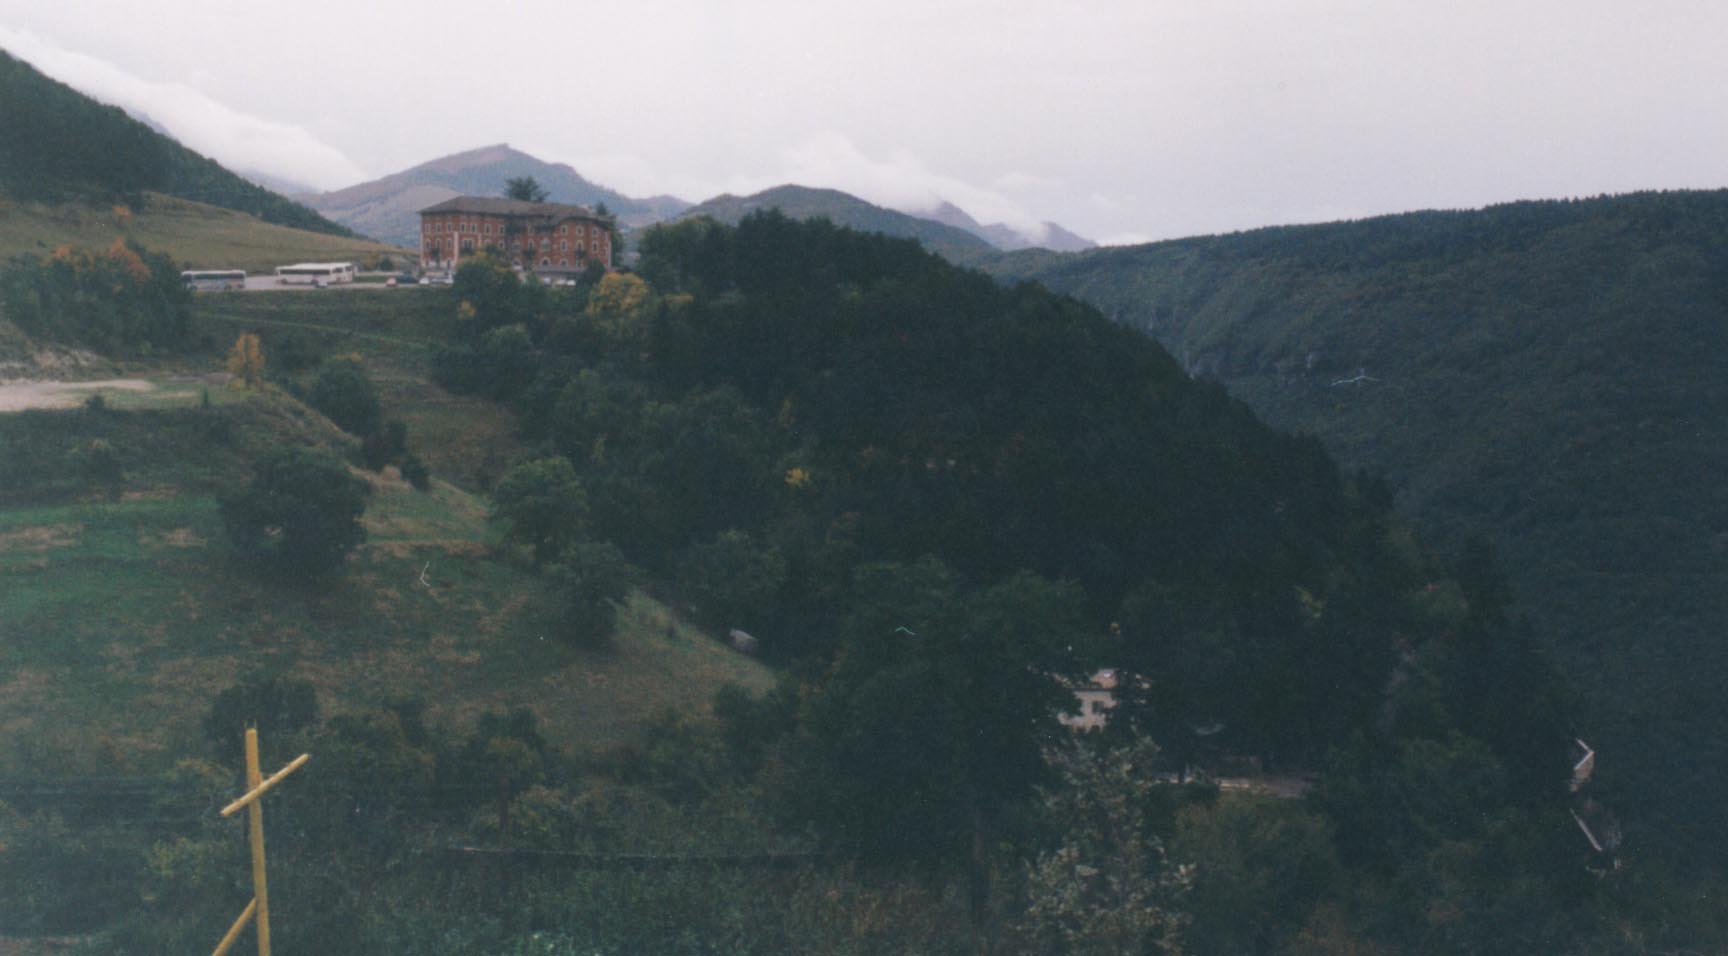 Actual appearance of the pass and monastery at La Corona